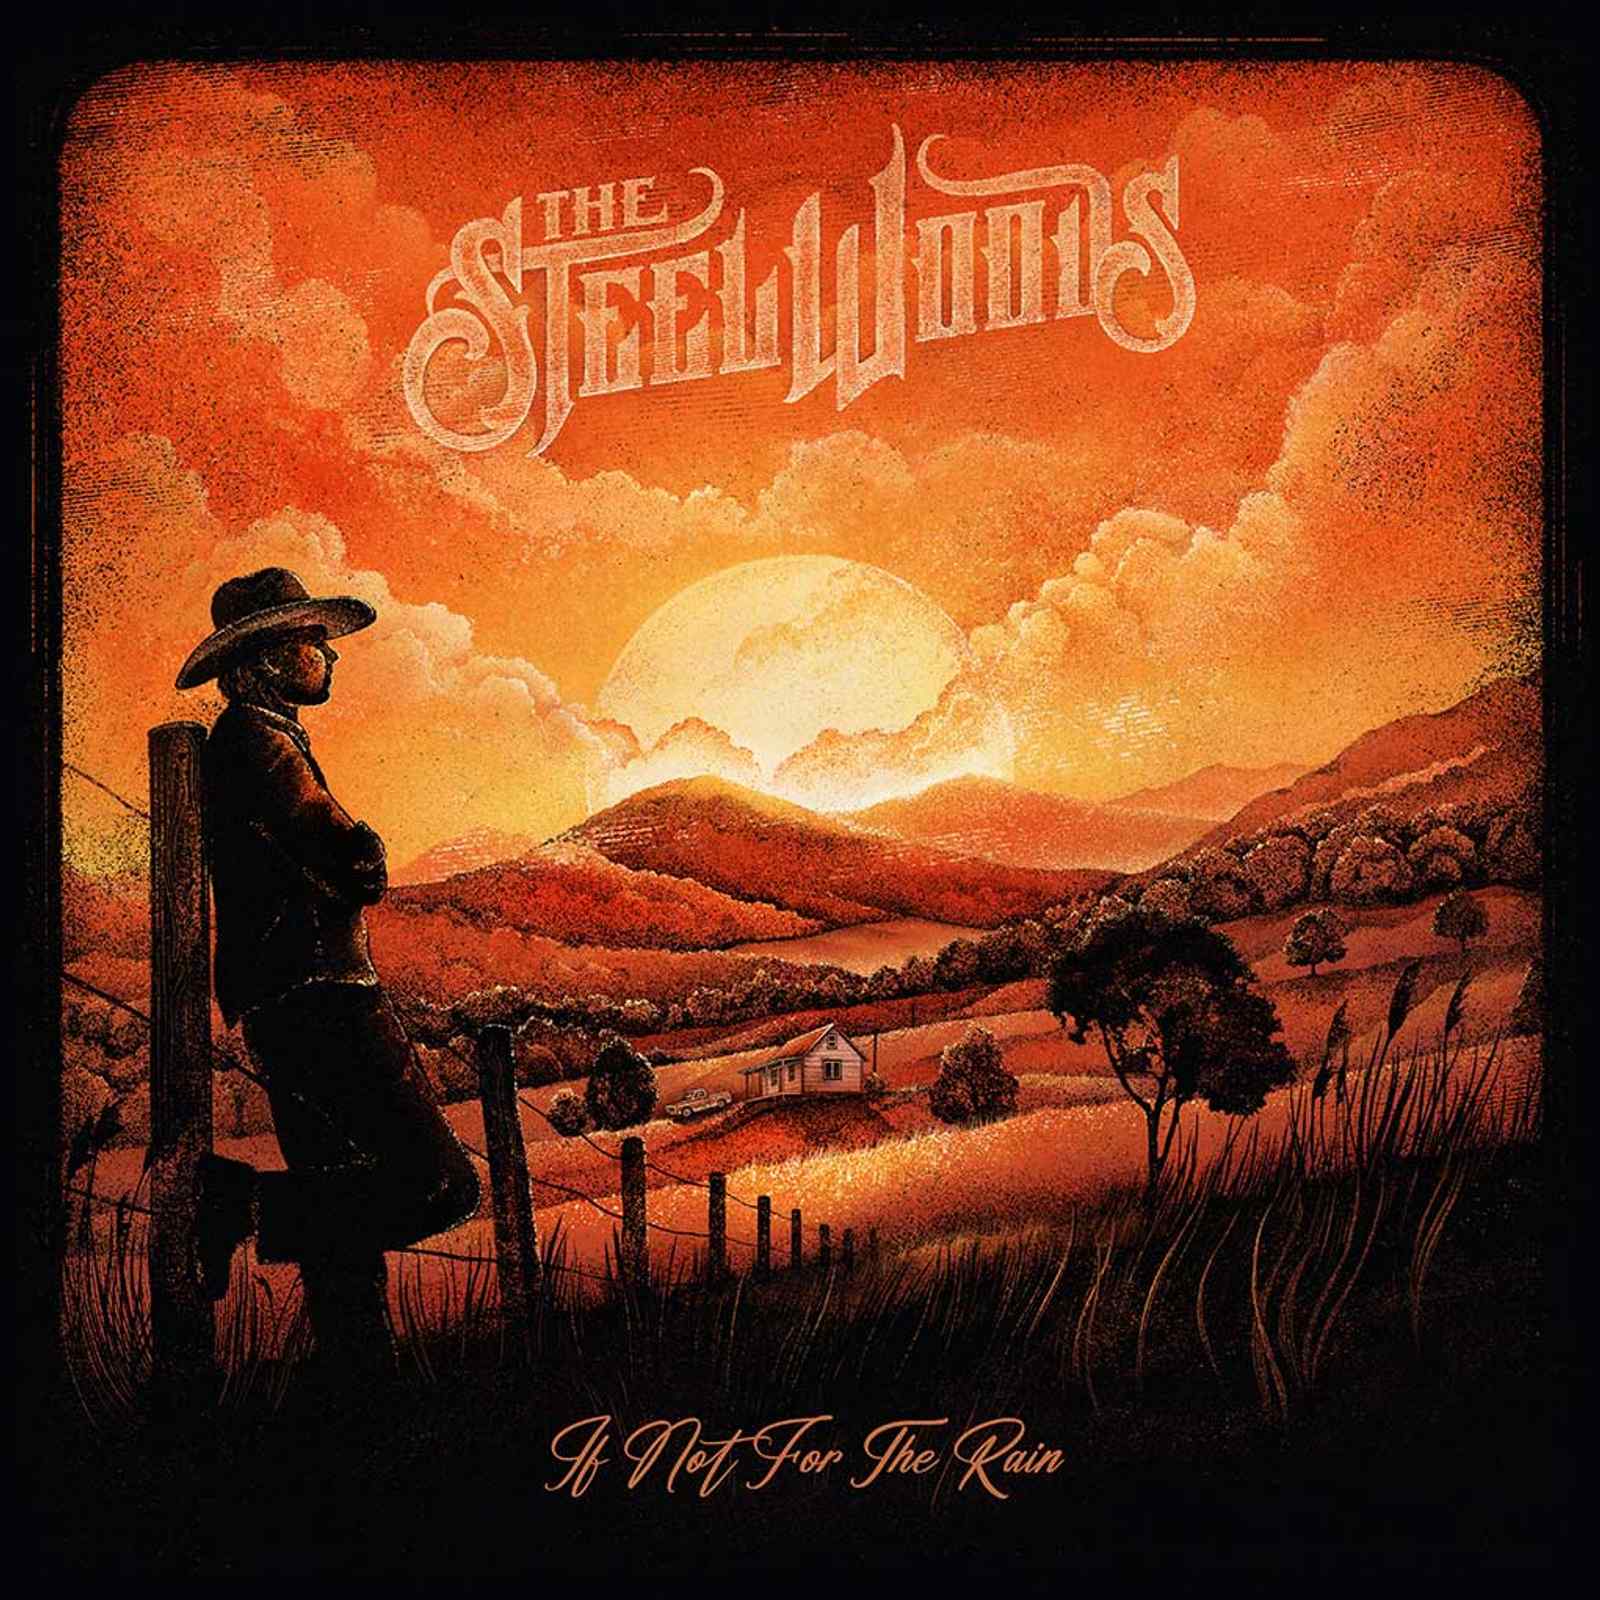 Southern rock band THE STEEL WOODS' new single "The Man from Nowhere" available today